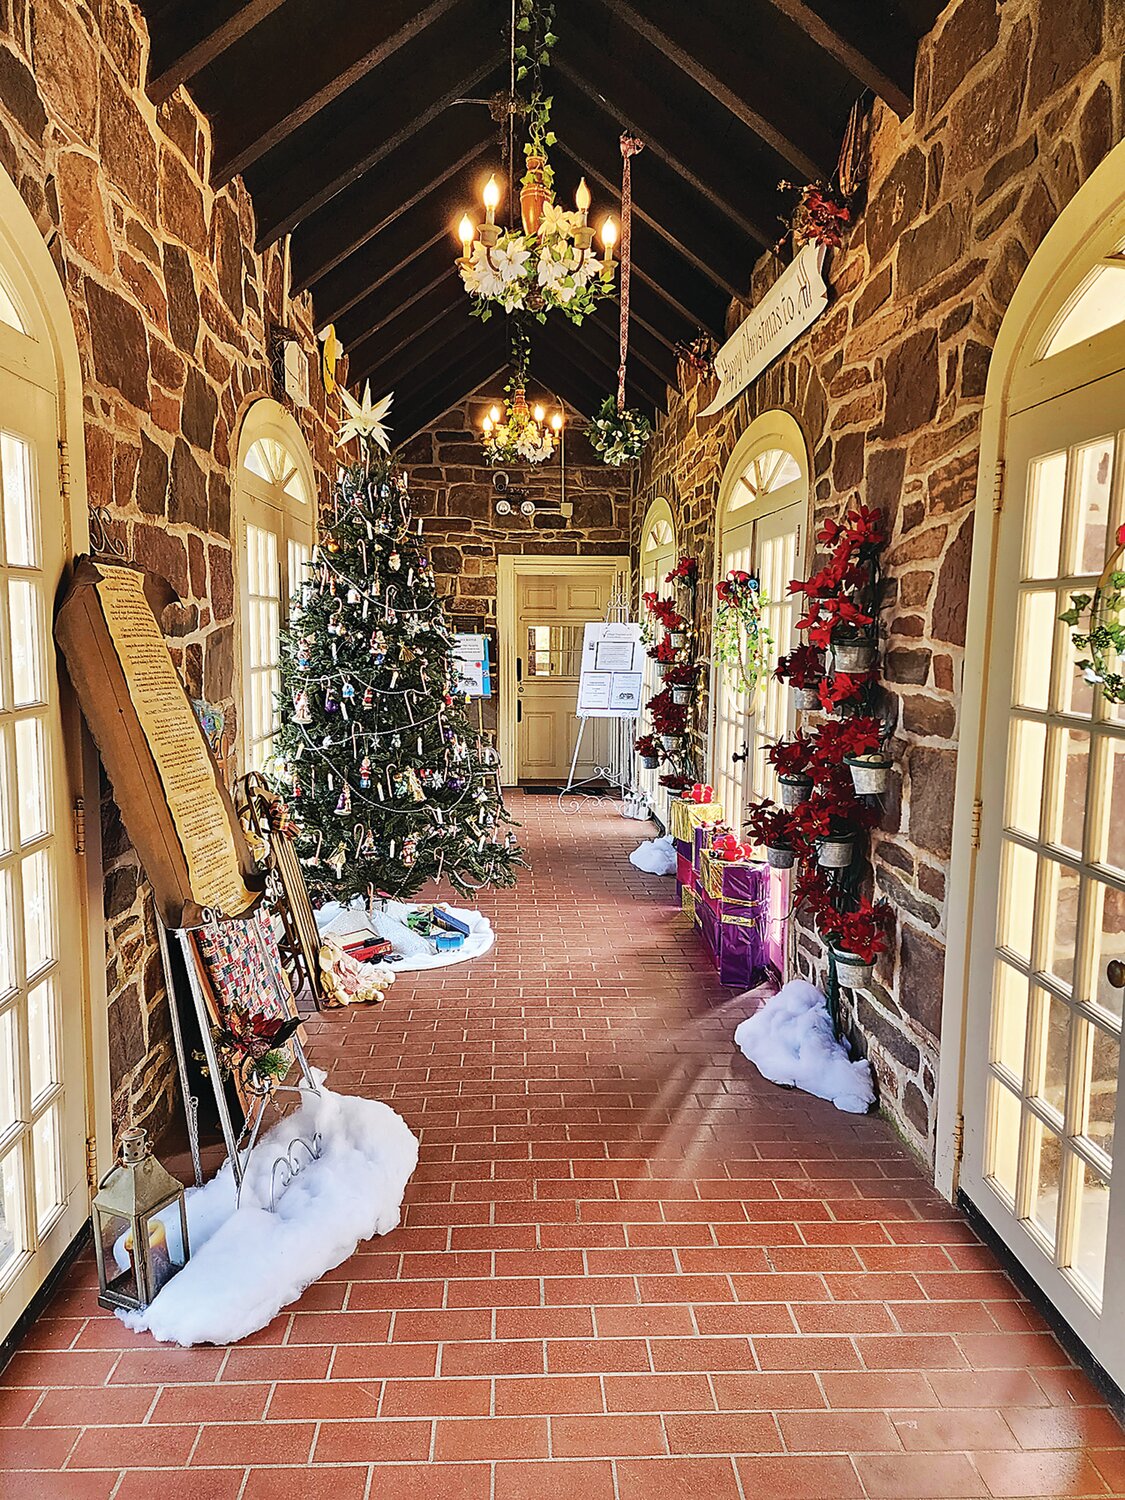 The breezeway decorated by the Village Improvement Association.